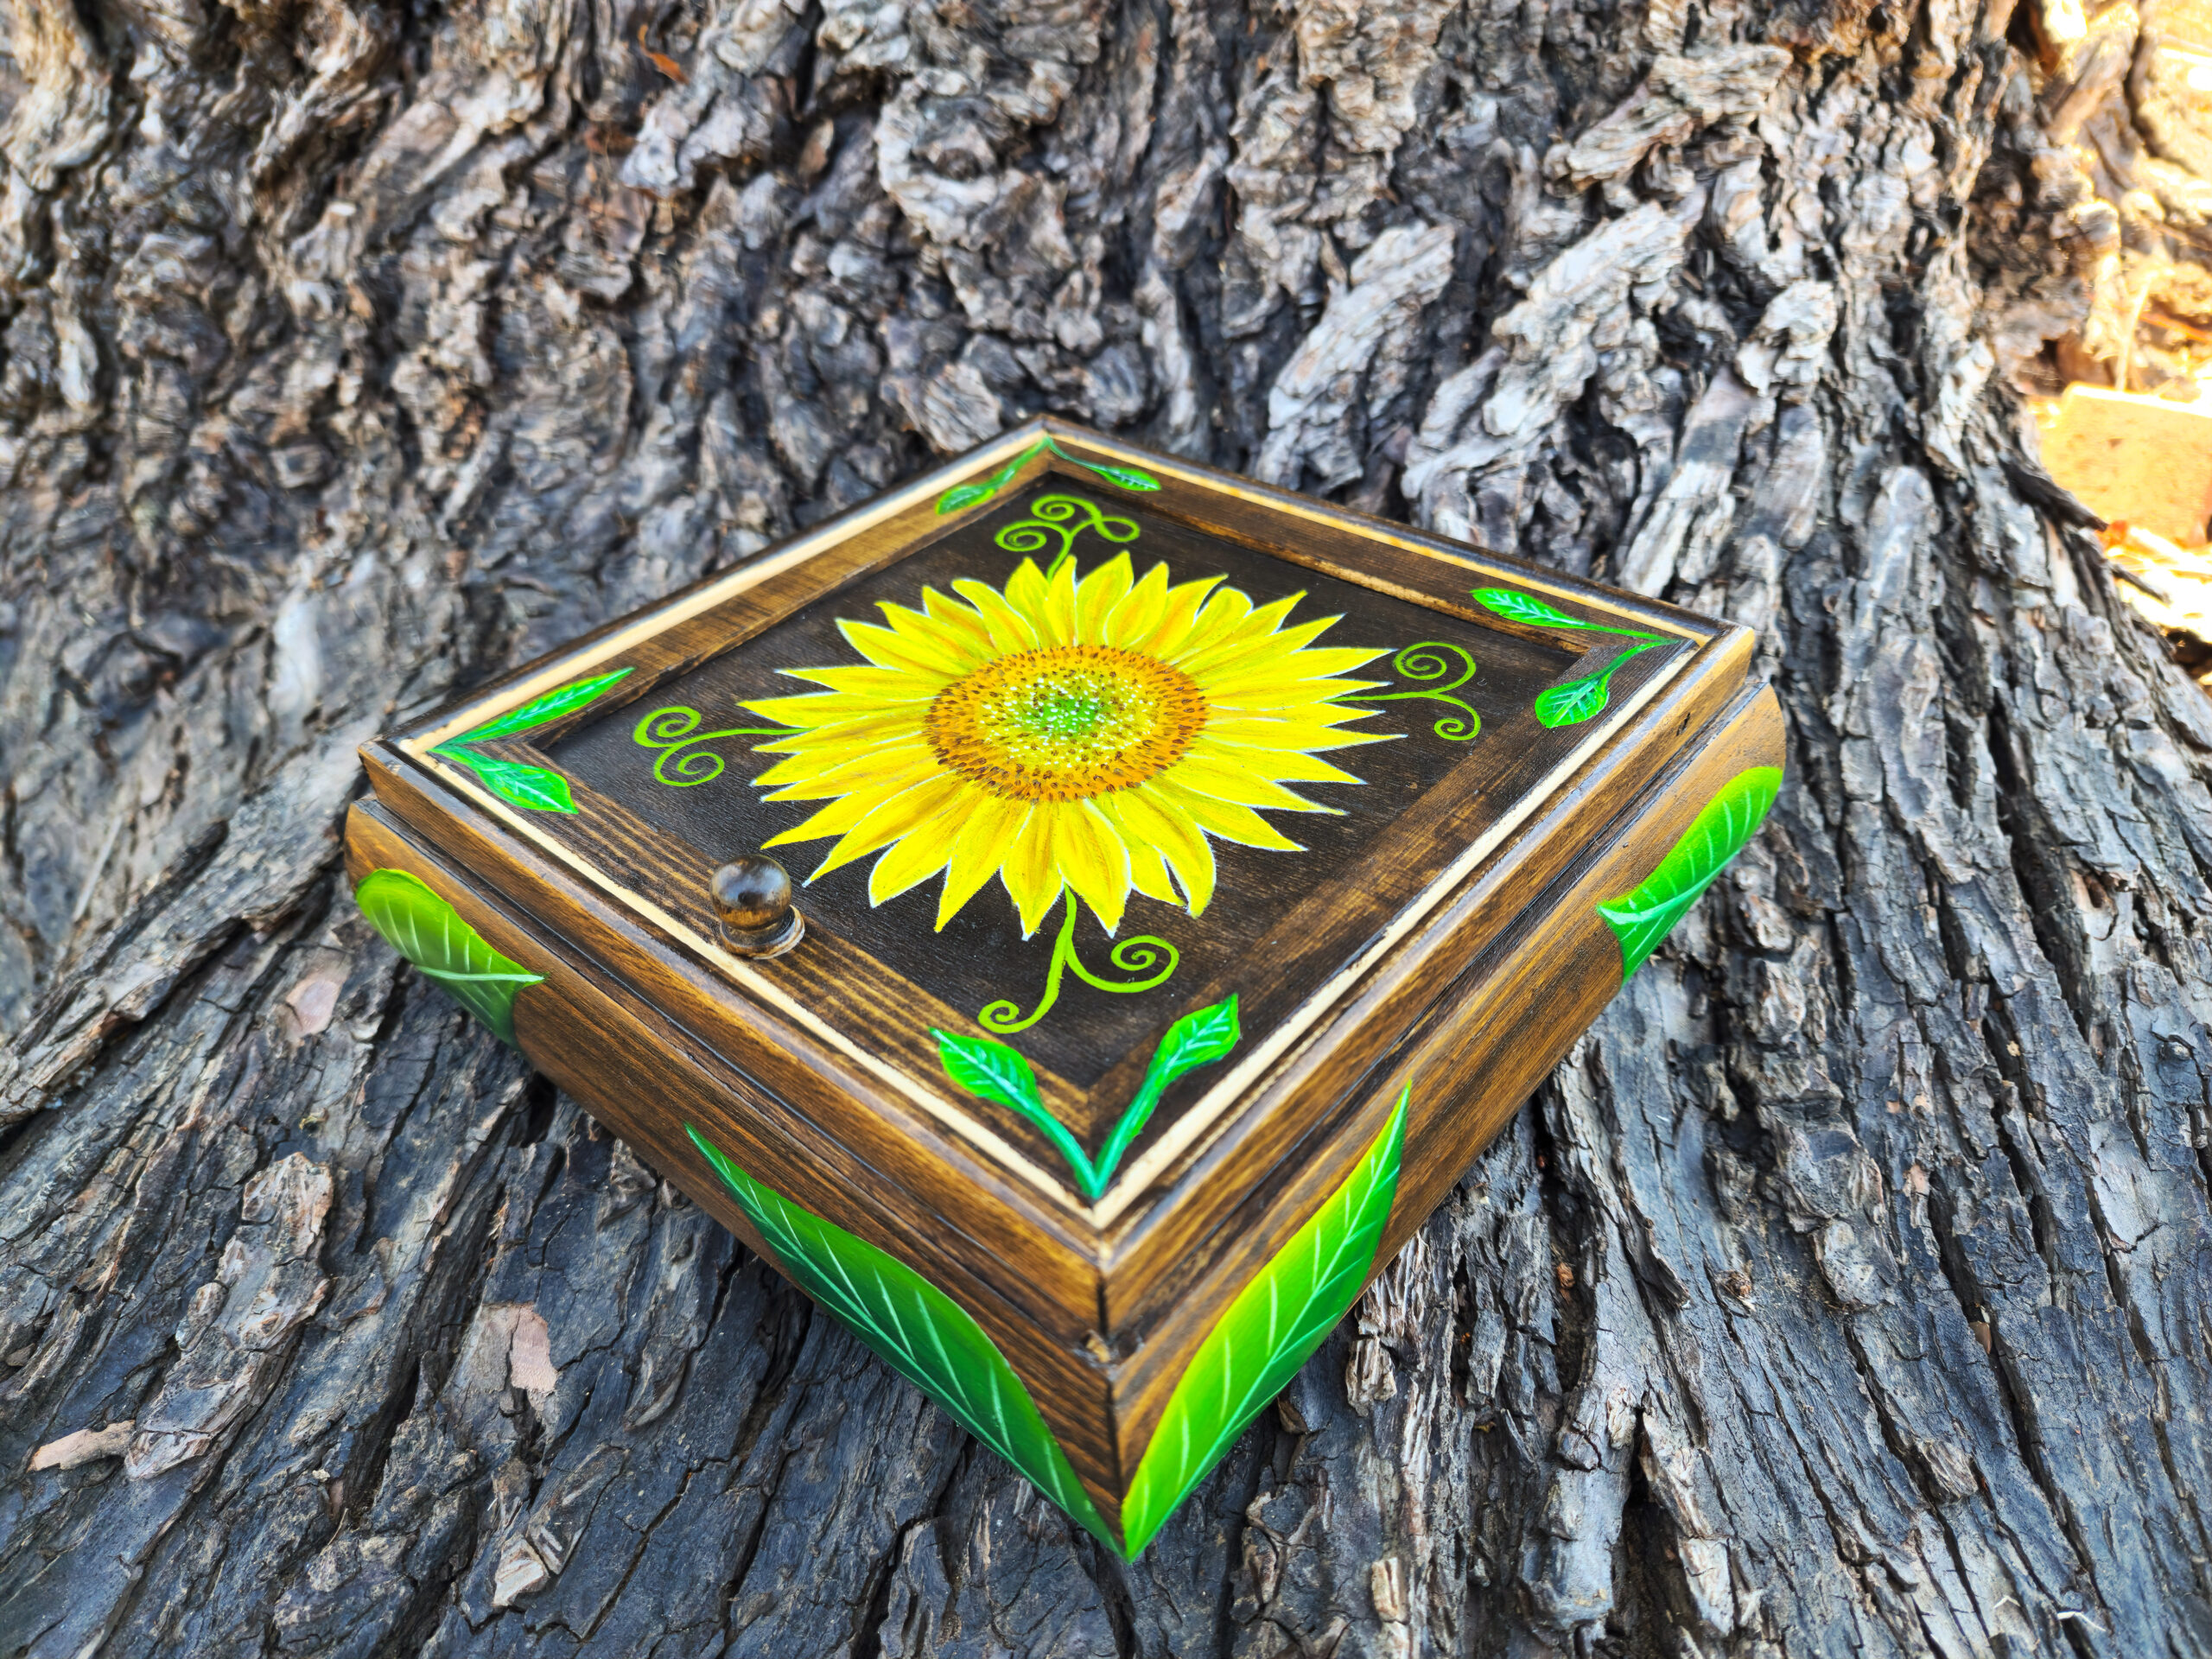 Beautiful handpainted wood trinket box with a mirror. This cute trinket box is an ideal gift for a special beloved one. You can store jewelry such as rings, necklaces, bracelets, or anything you would like to keep in a particular place, especially in this elegant and artistic trinket box.